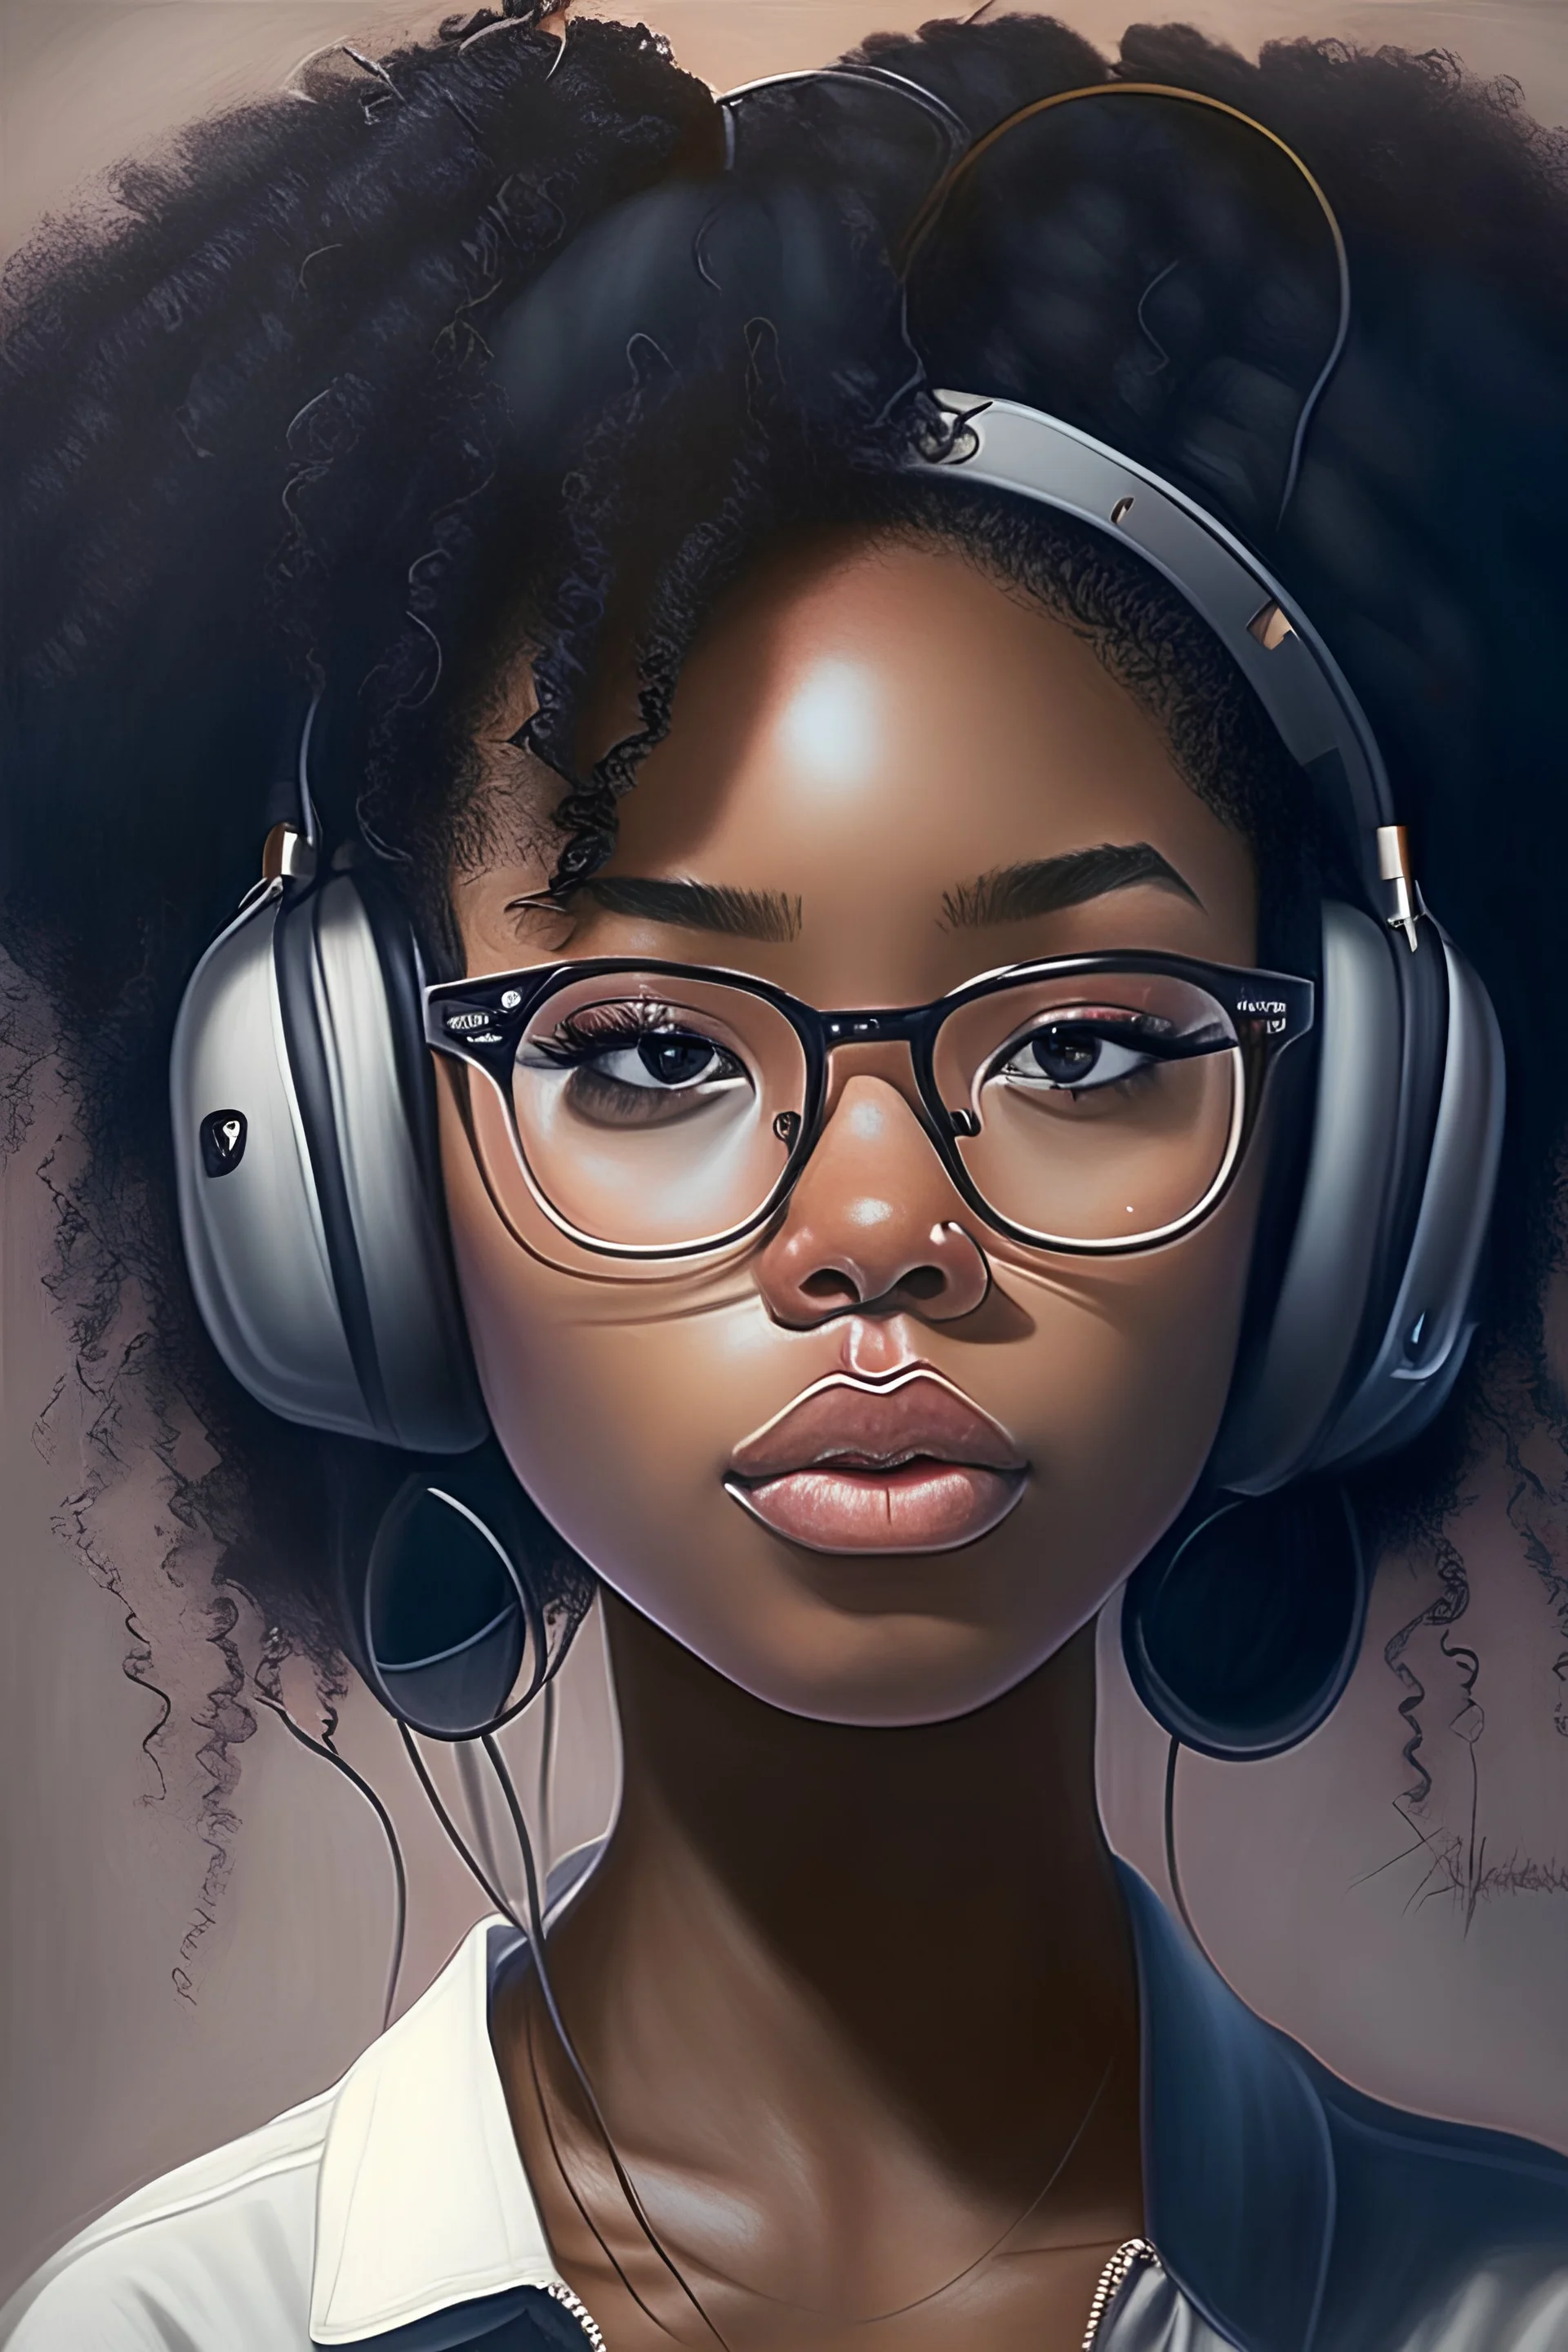 asia lynn howard 20 year old black girl with glasses and headphones afro